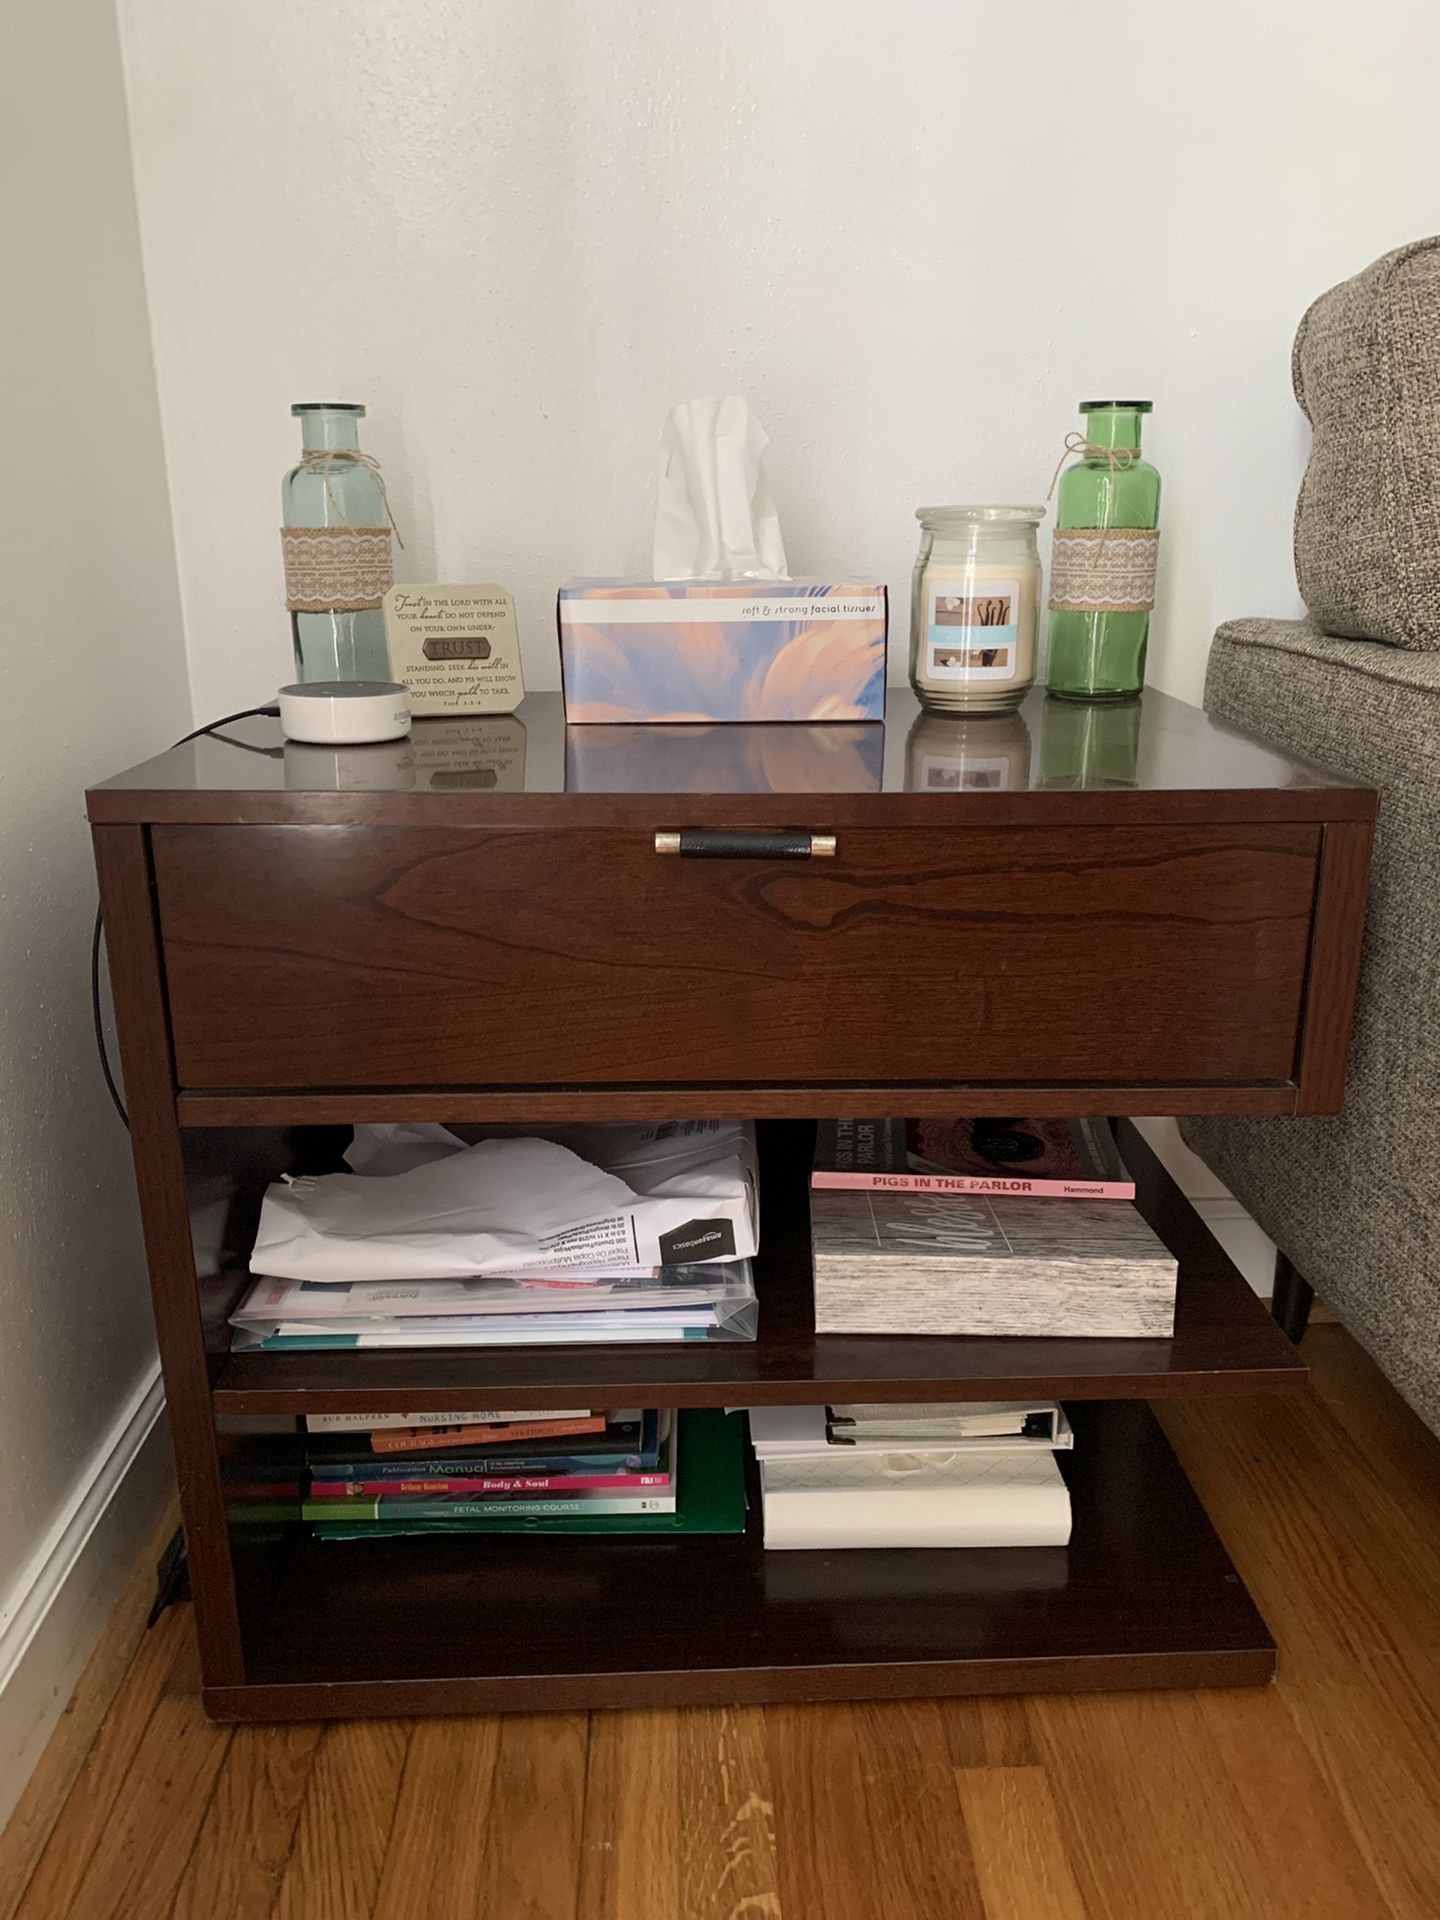 Night stand with shelving